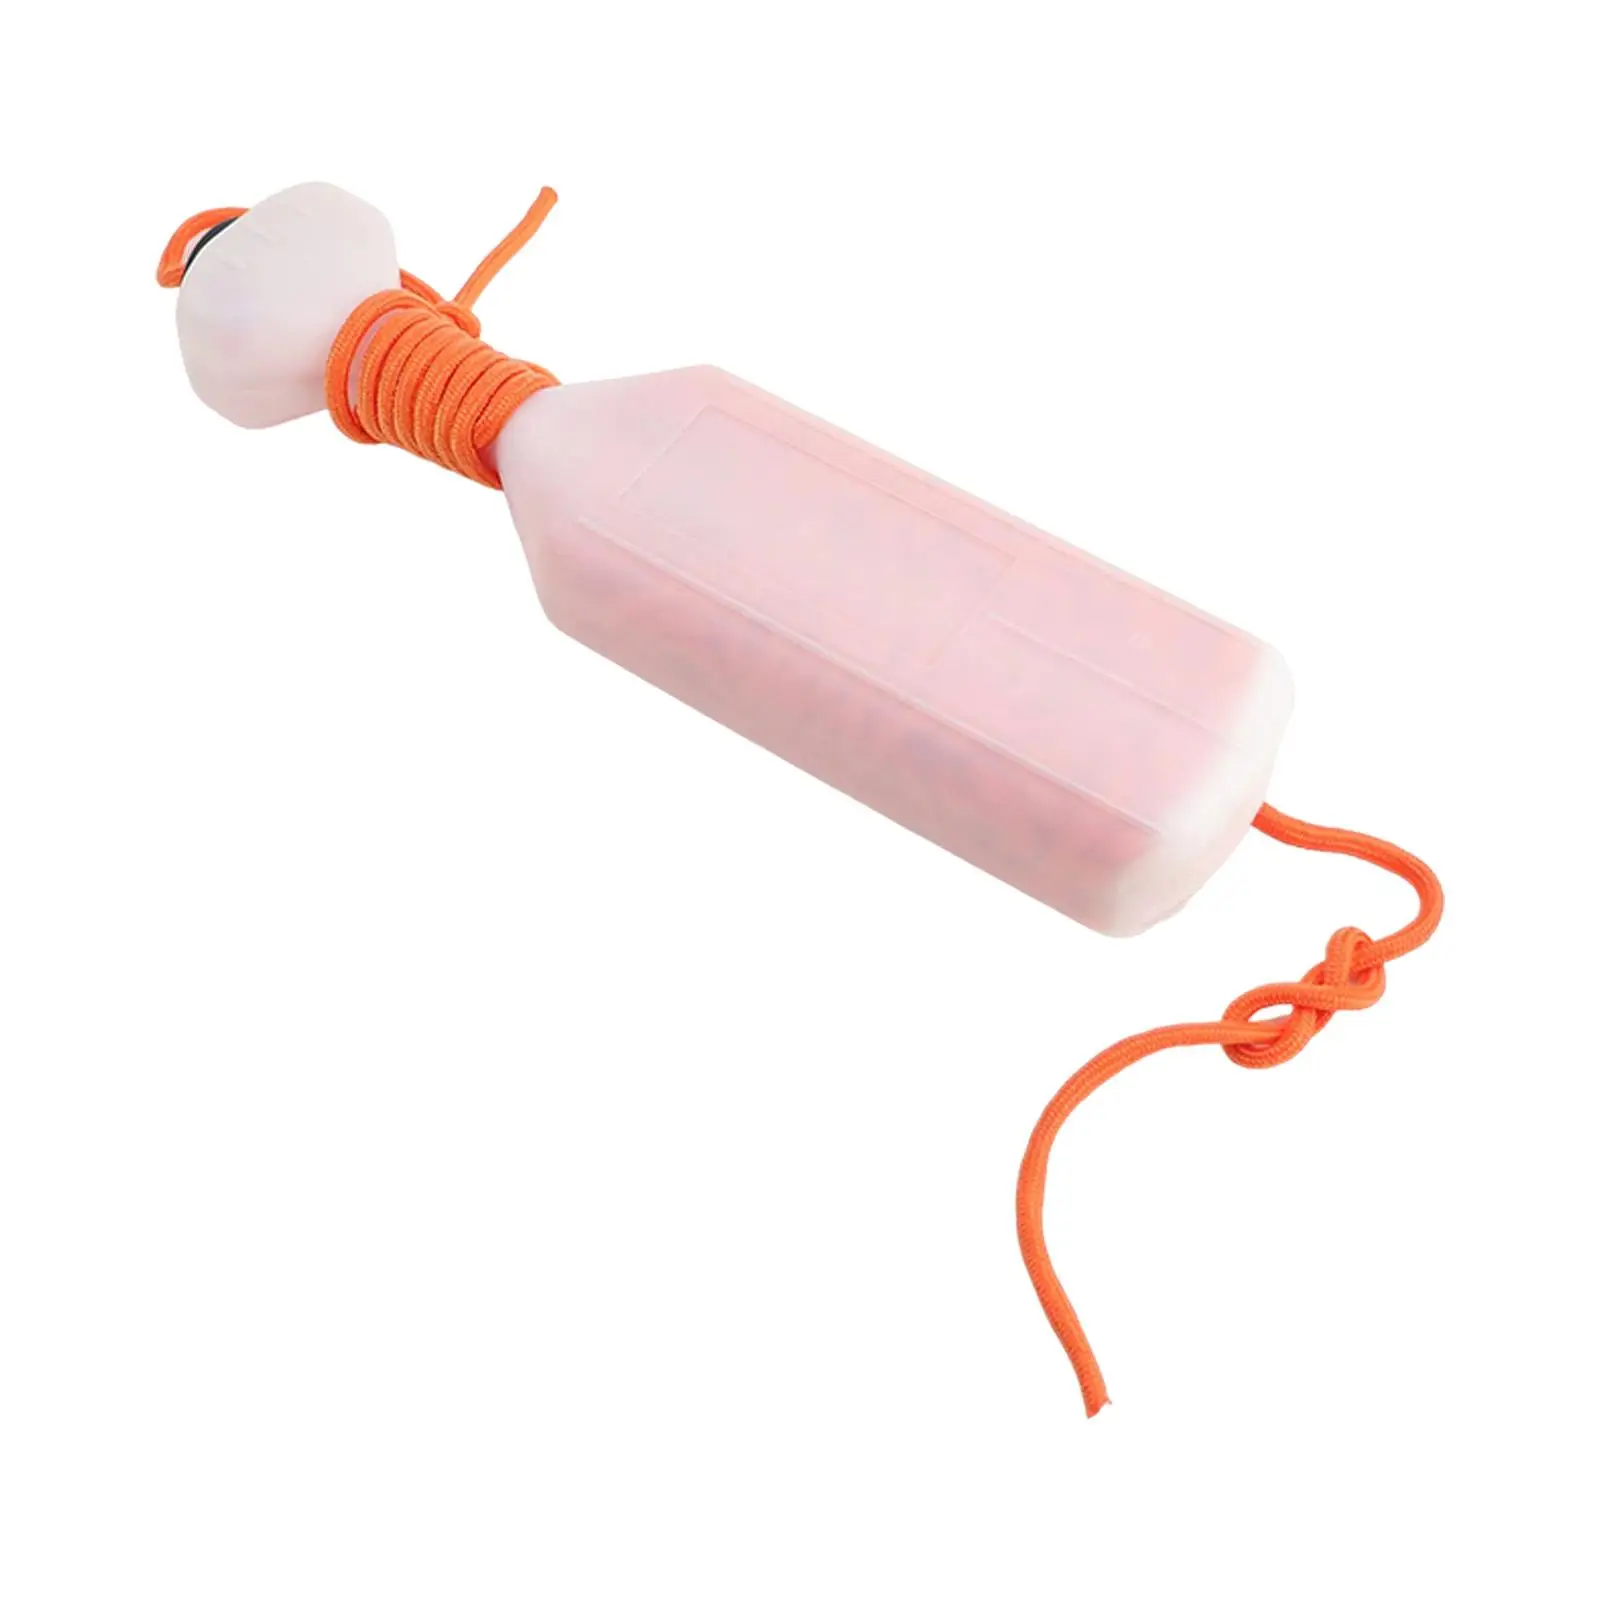 Floating Rescue Throw Rope Equipment Storage Bottle 30M Durable 8mm for Kayaking Rafting Climbing Outdoor Activities